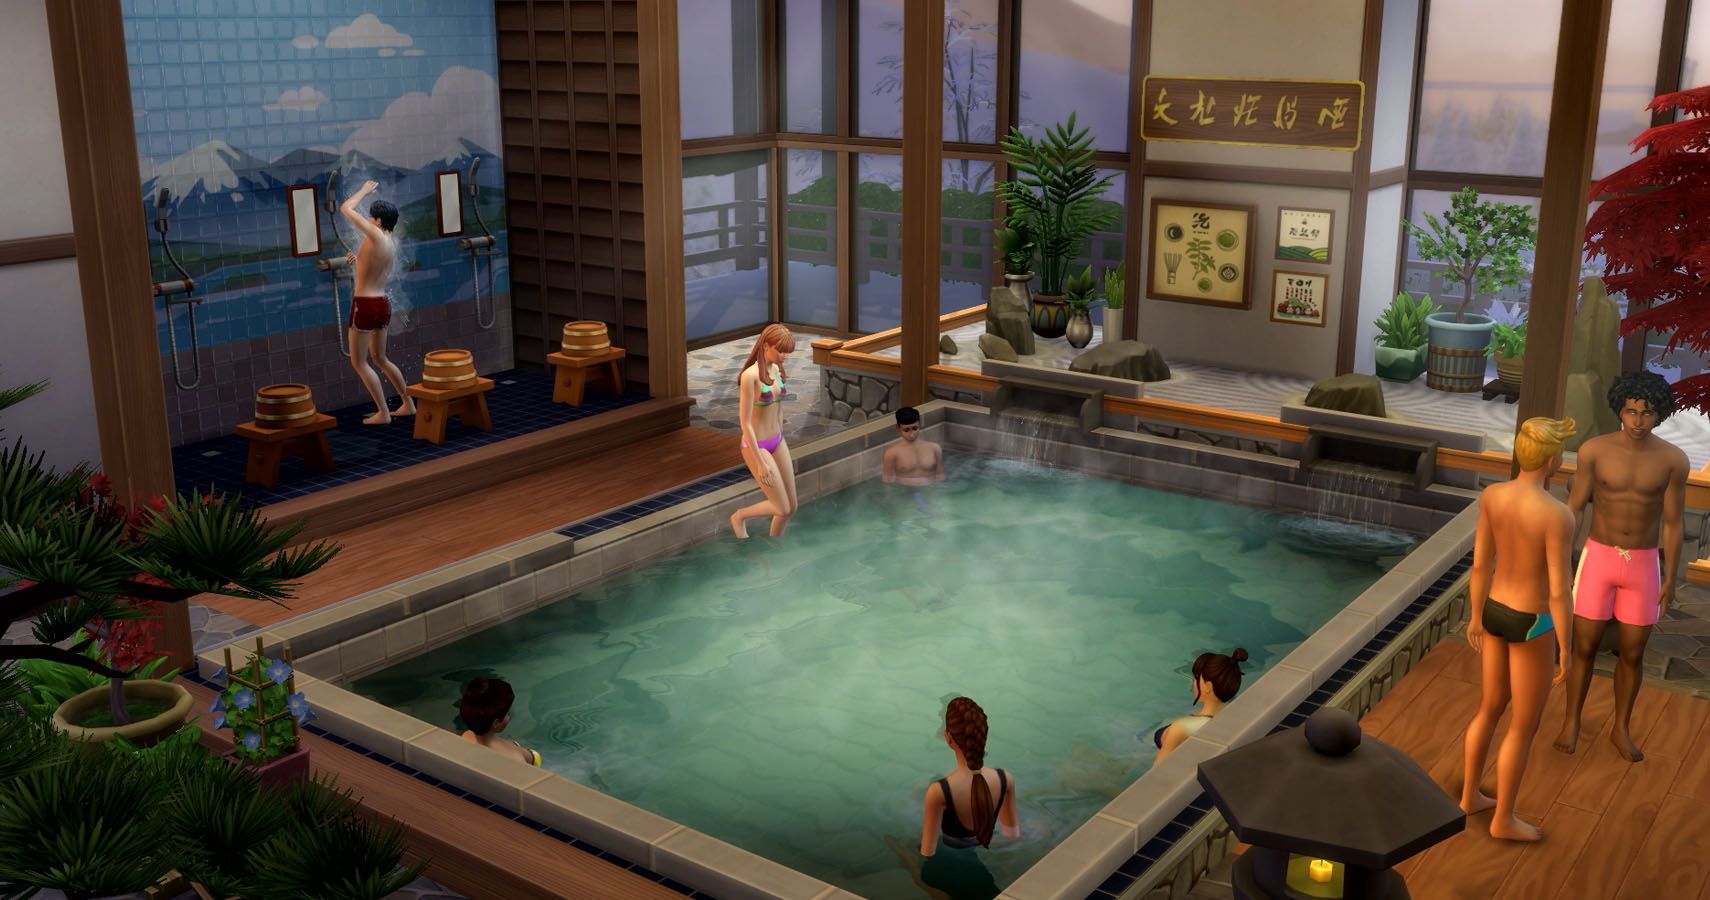 Sims in hot springs inside an Onsen